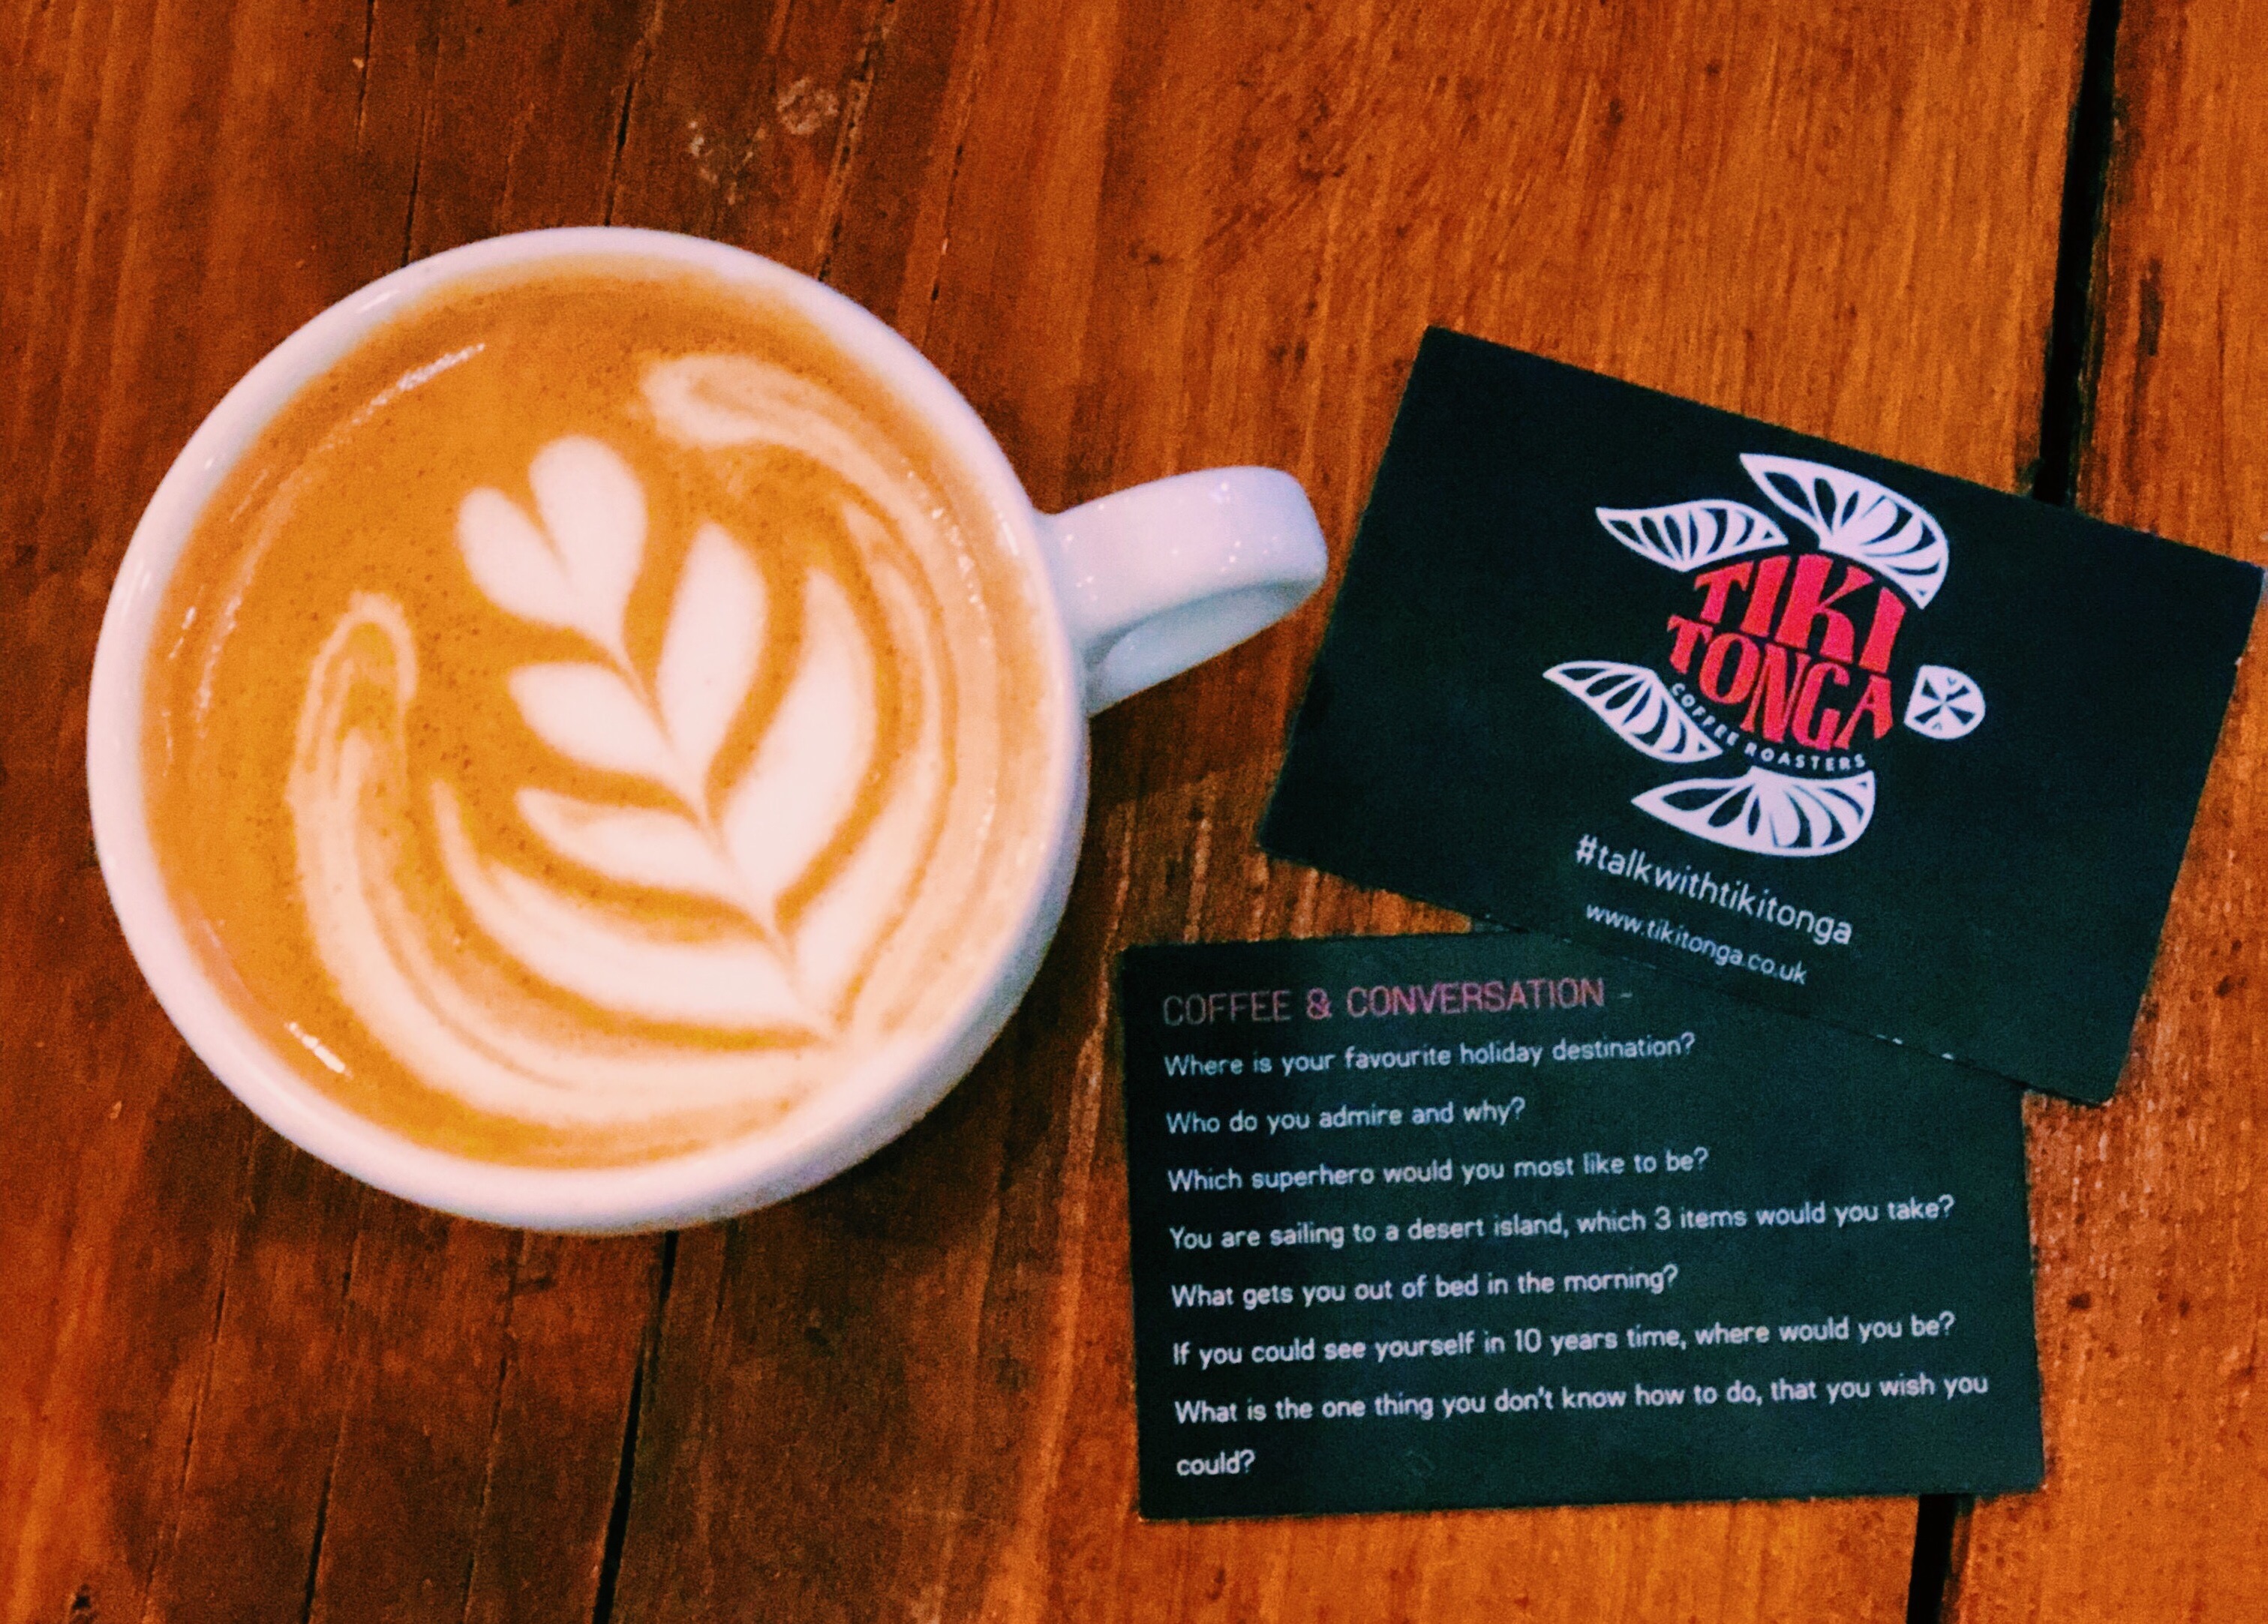 Get the healthy buzz: Tiki Tonga aims for caffeine-fuelled conversation